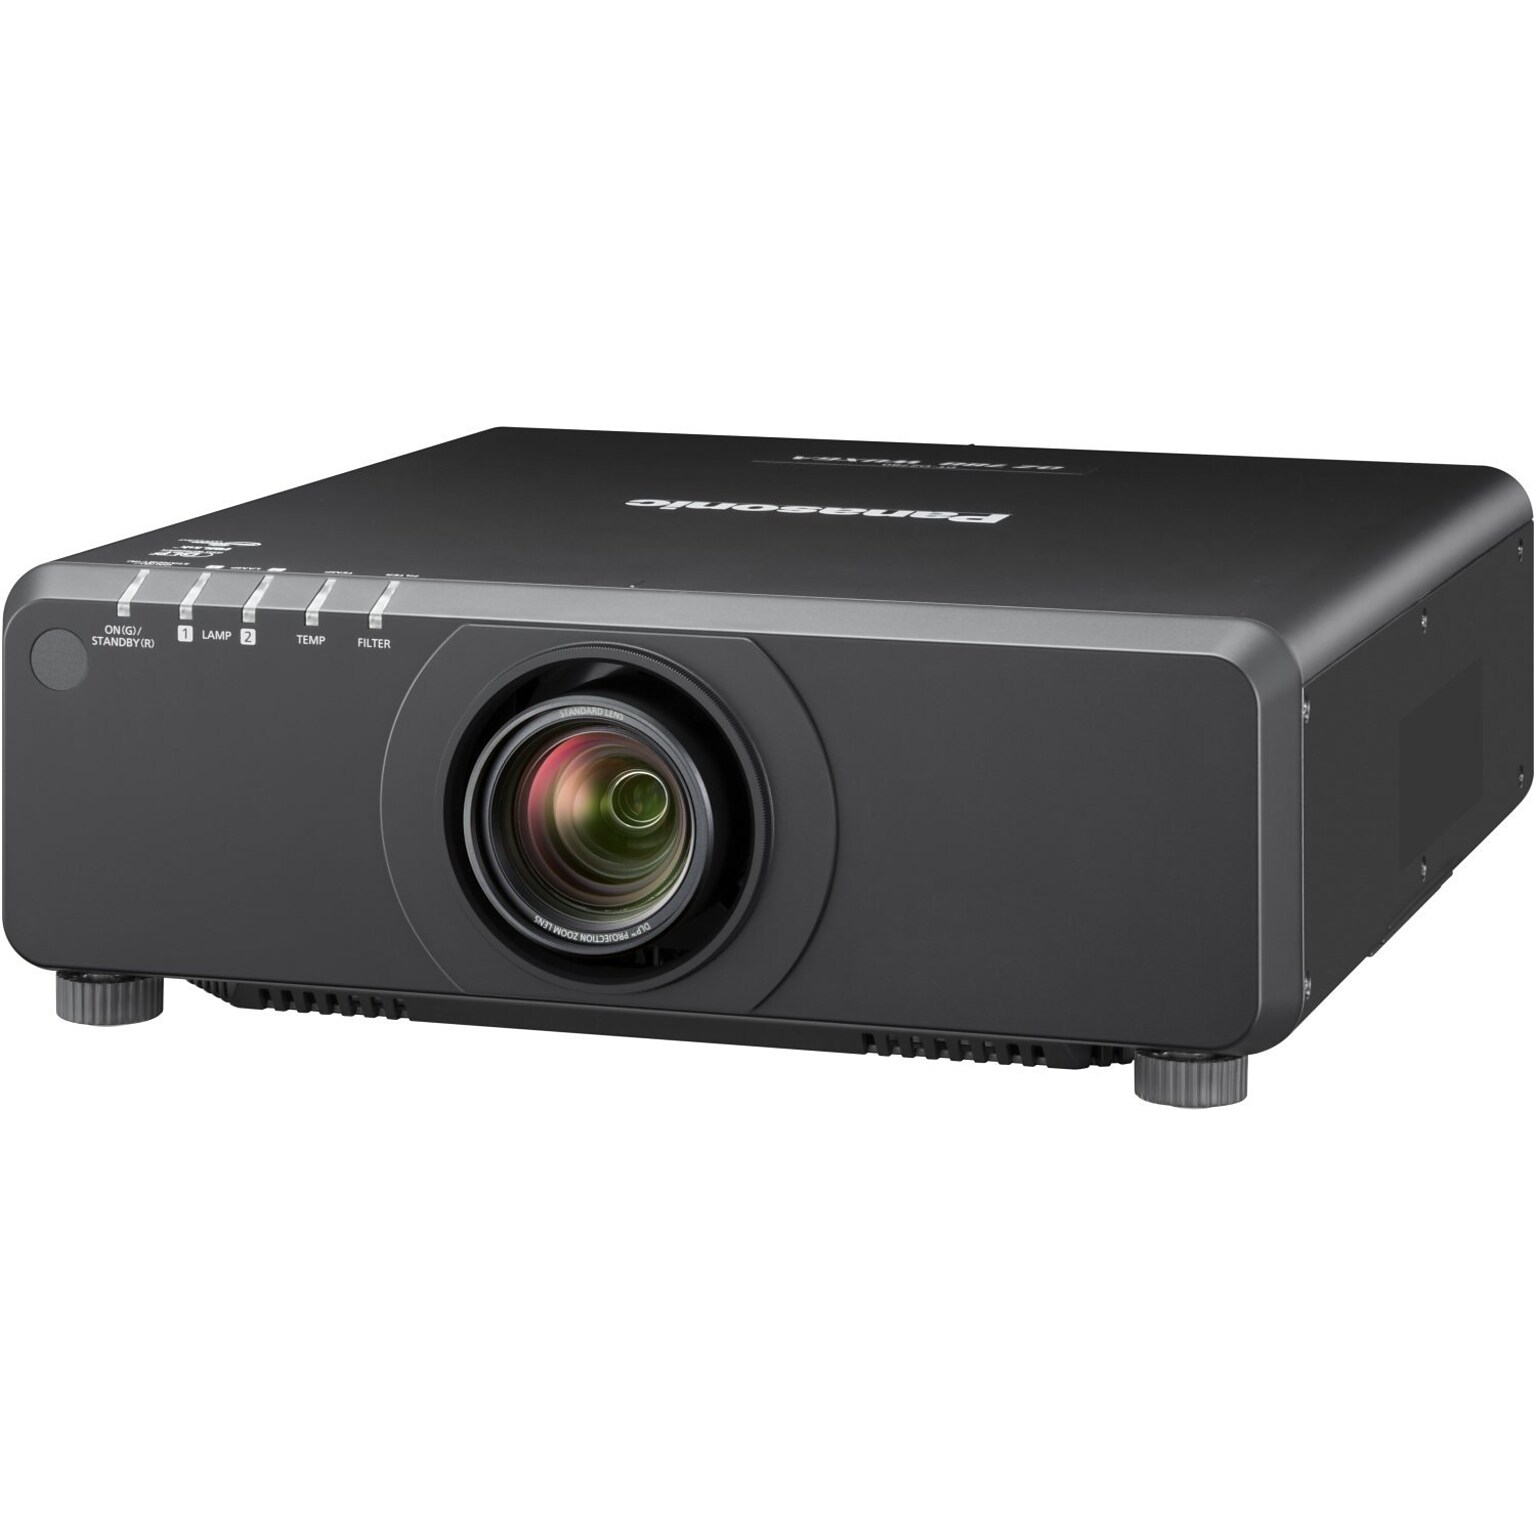 Panasonic PTDW750WU WXGA 1-Chip DLP Projector White, Full Brightness with Virtually Un-noticeable Operation